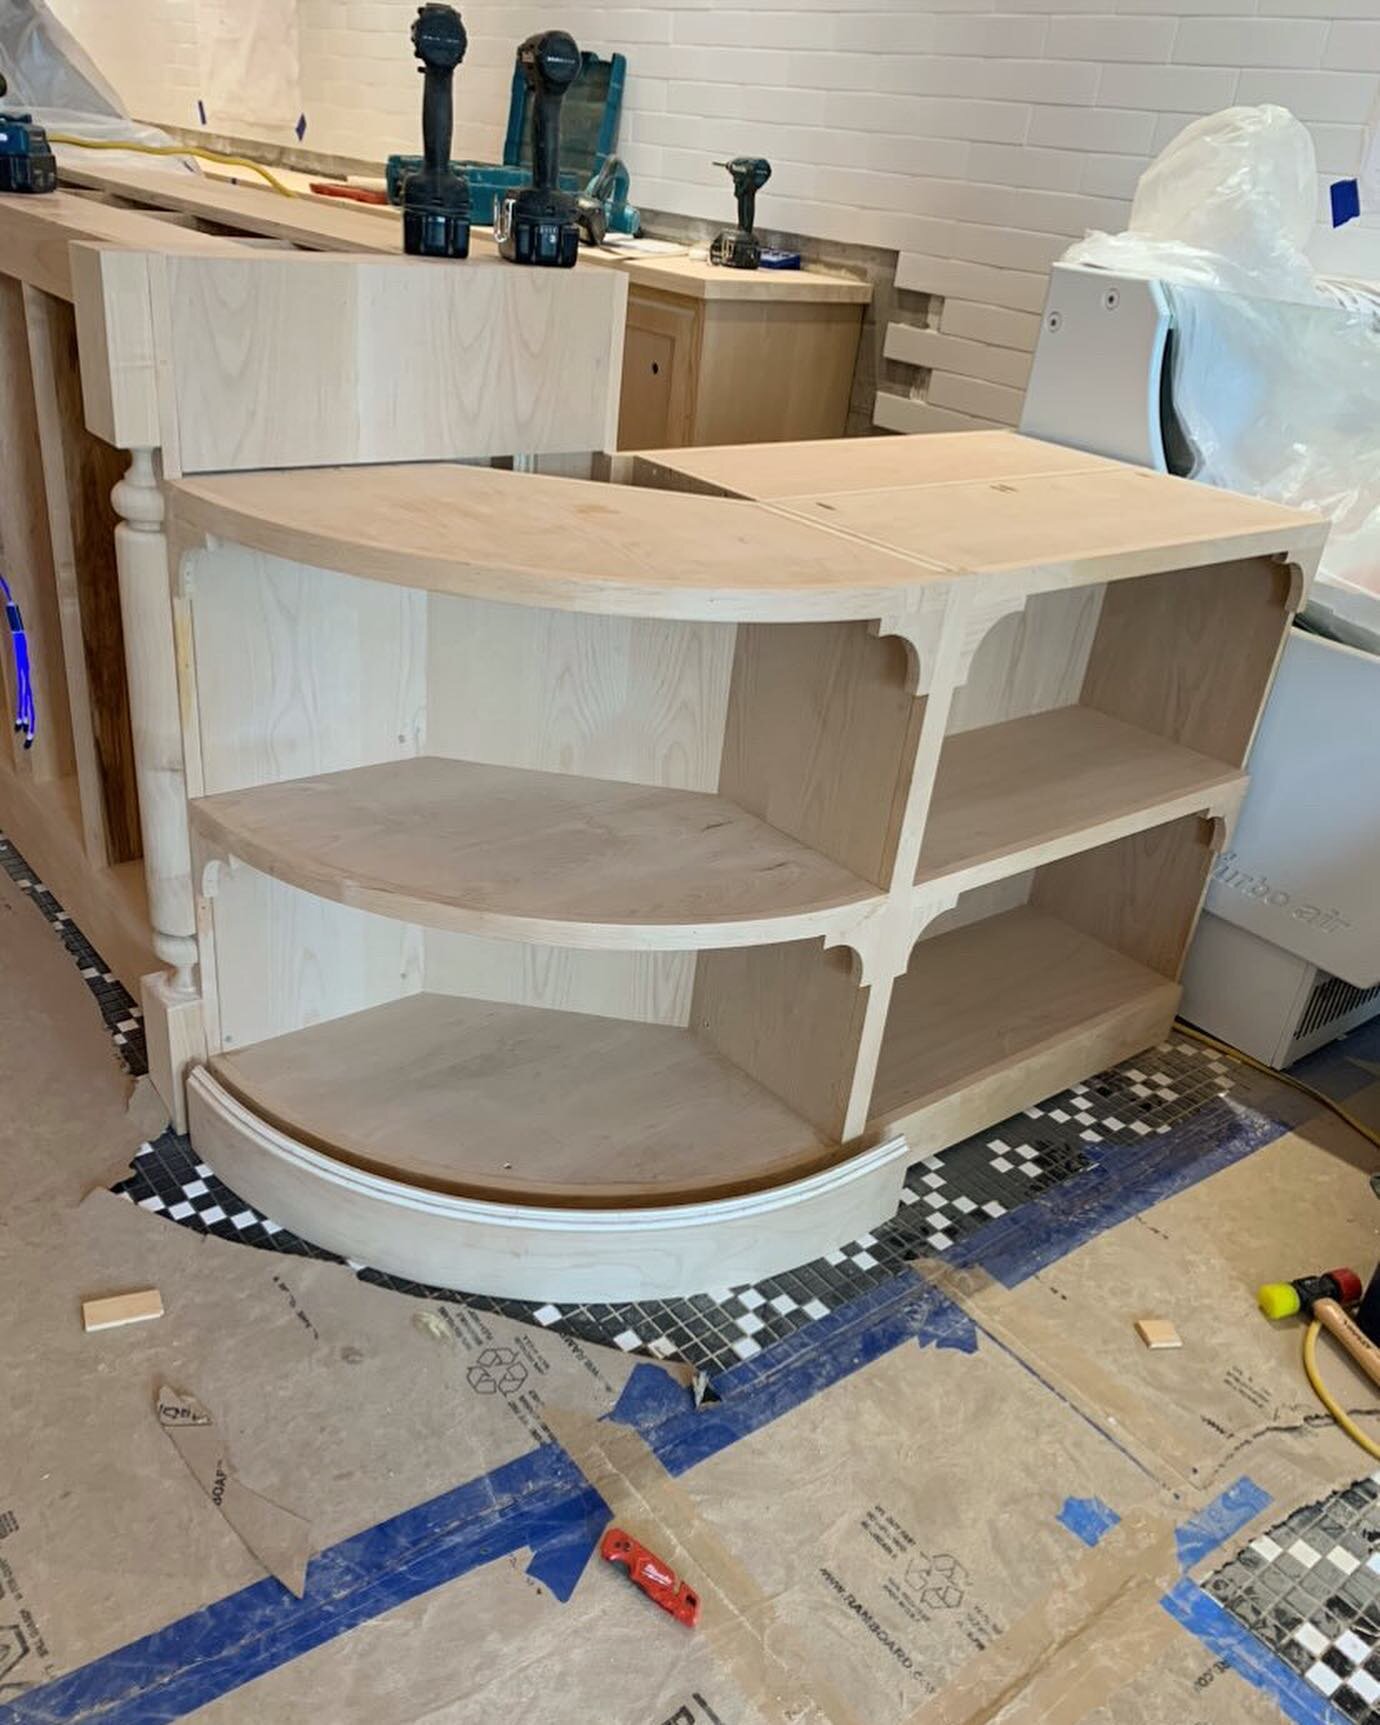 The VW crew has been working on a super cool project the last couple weeks. Here are some sneak peaks of the install in progress. #customcabinetry #customcarpentry #radiuscabinetry #ojai #ojaiicecream #woodturning #turnedlegs